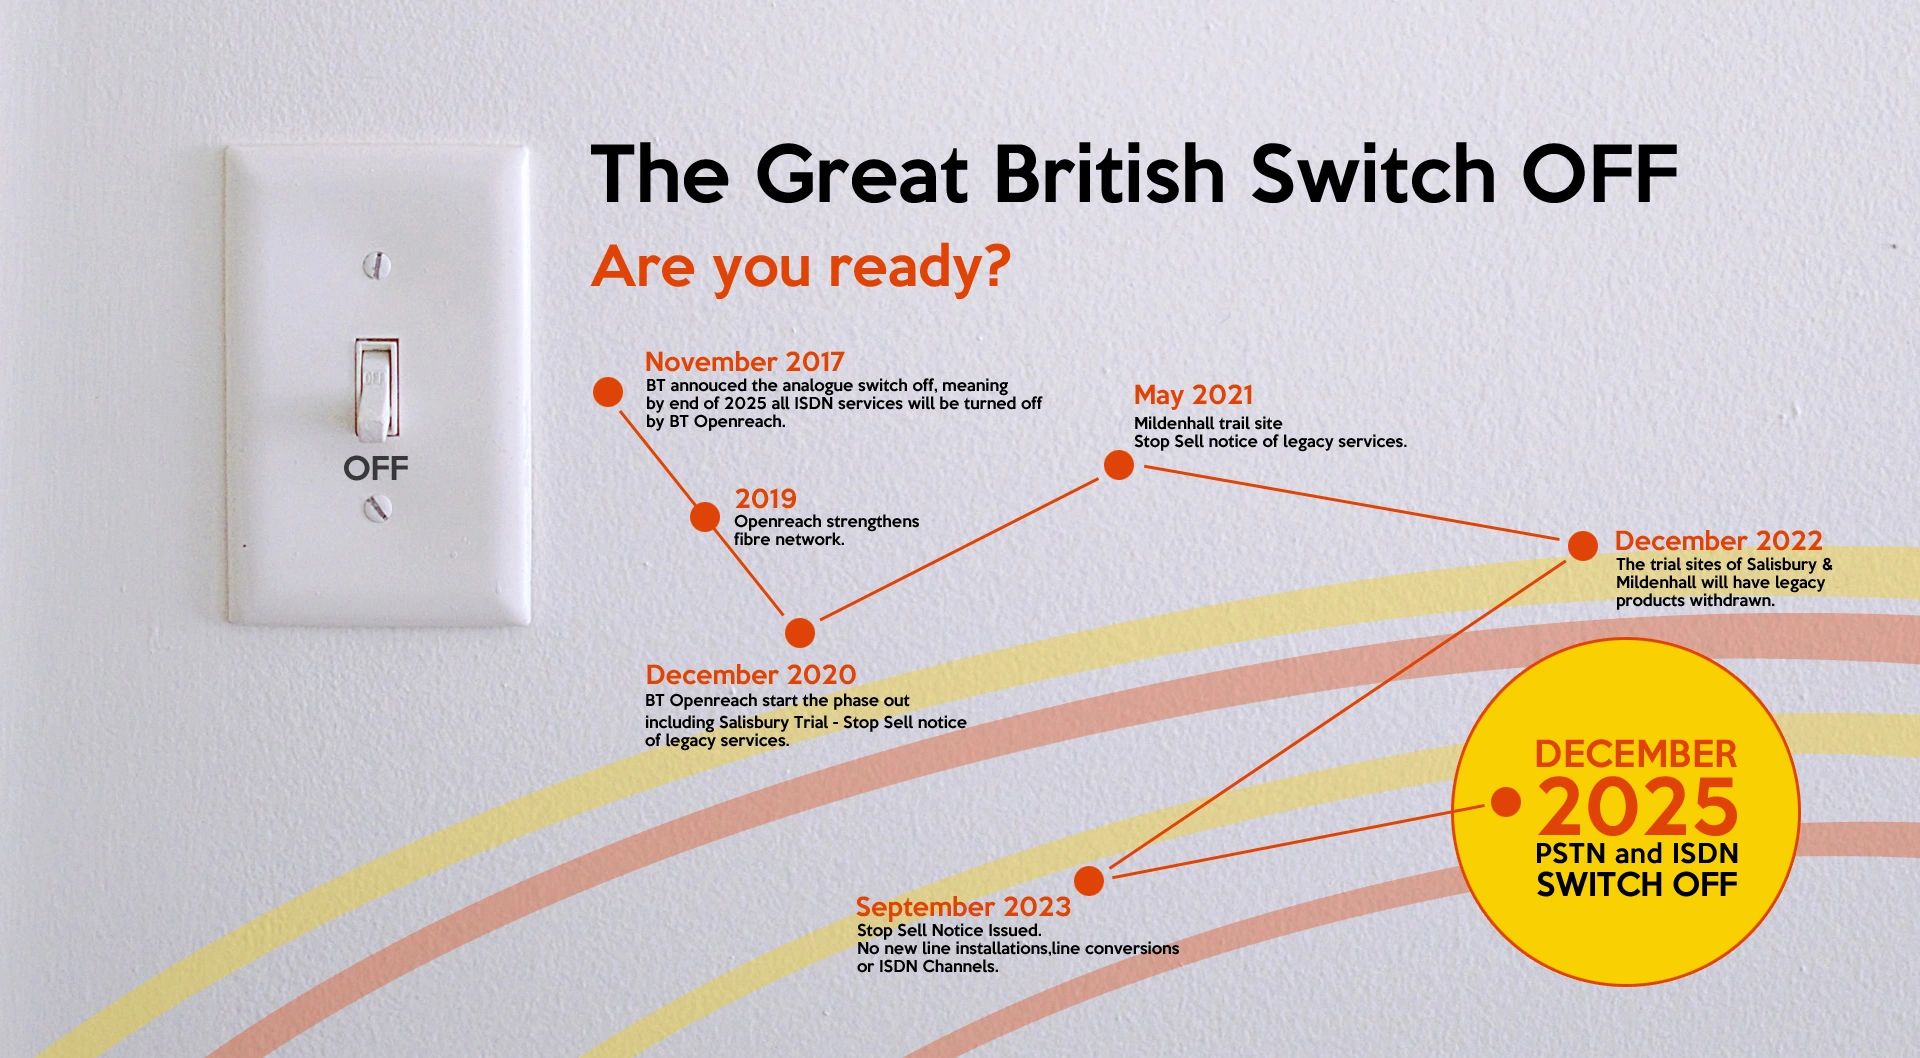 The Great British Switch Off